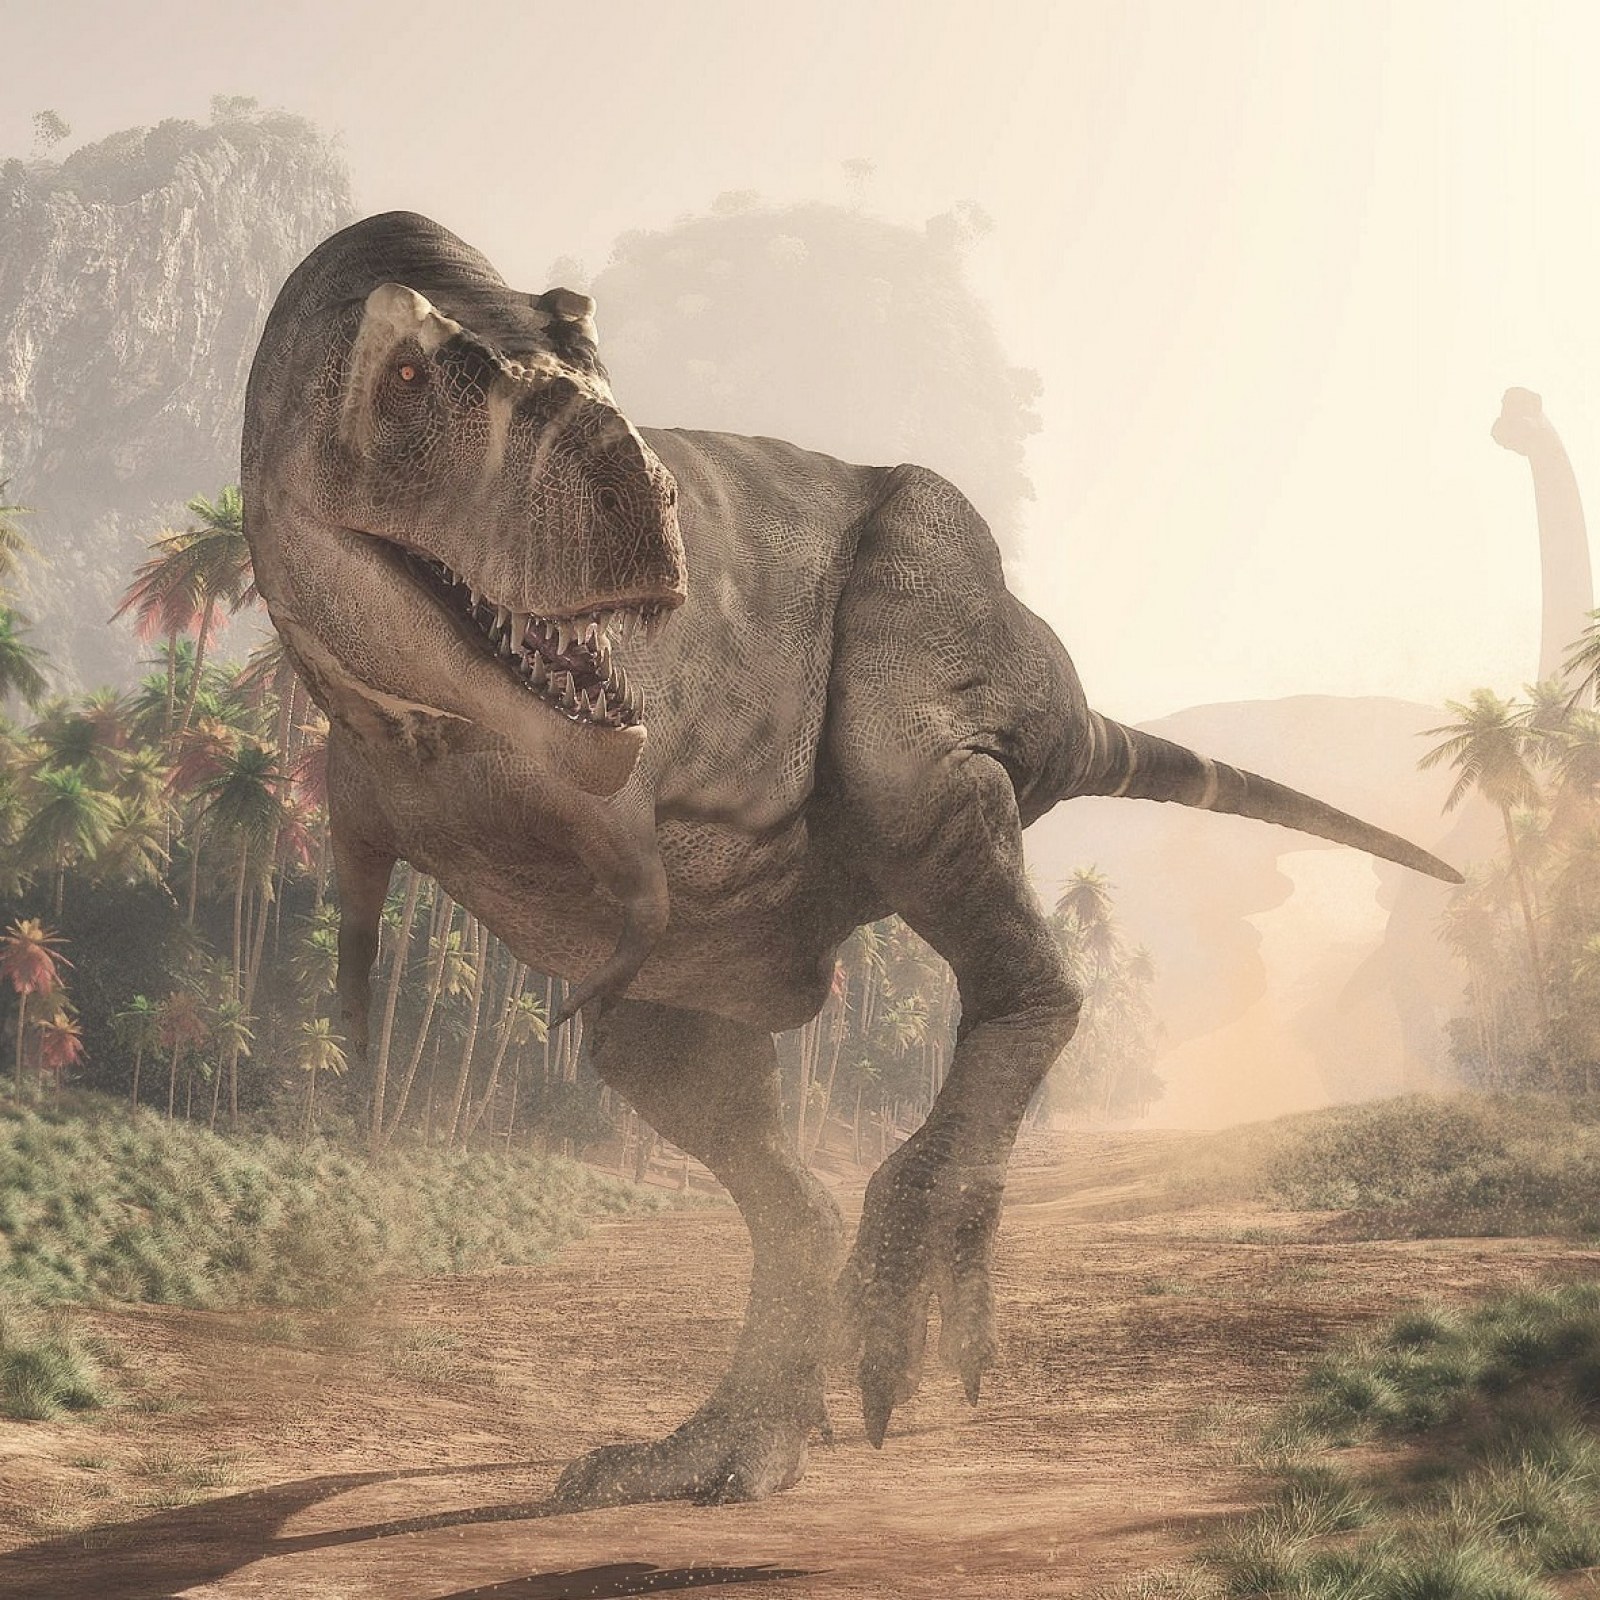 The Top 10 Famous Dinosaurs That Roamed the Earth